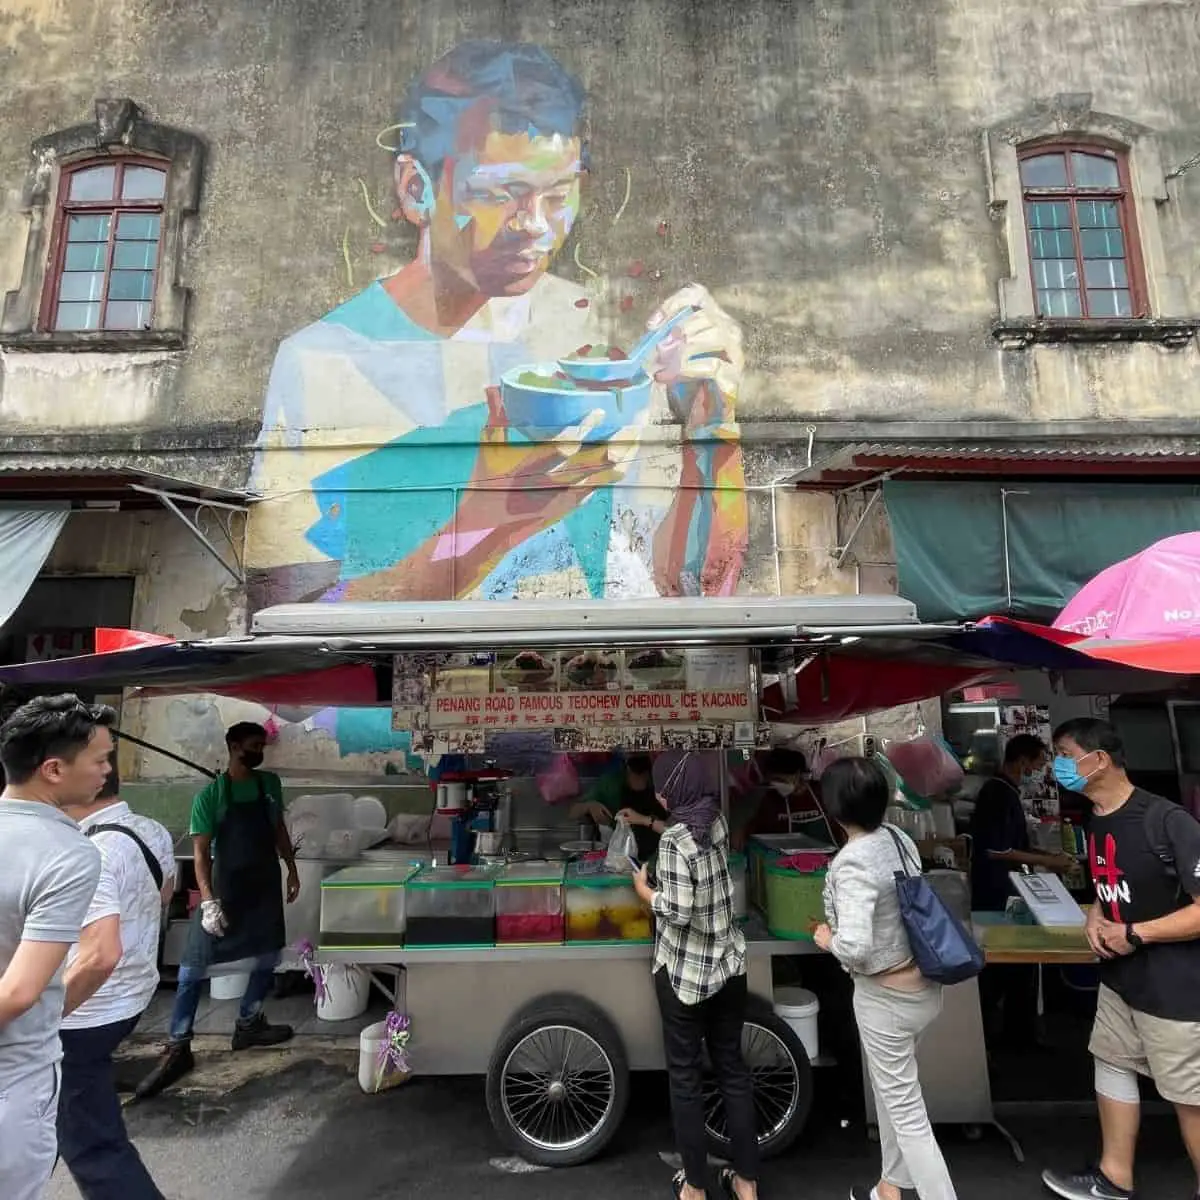 Penang Road Famous Teochew Chendul mural and store